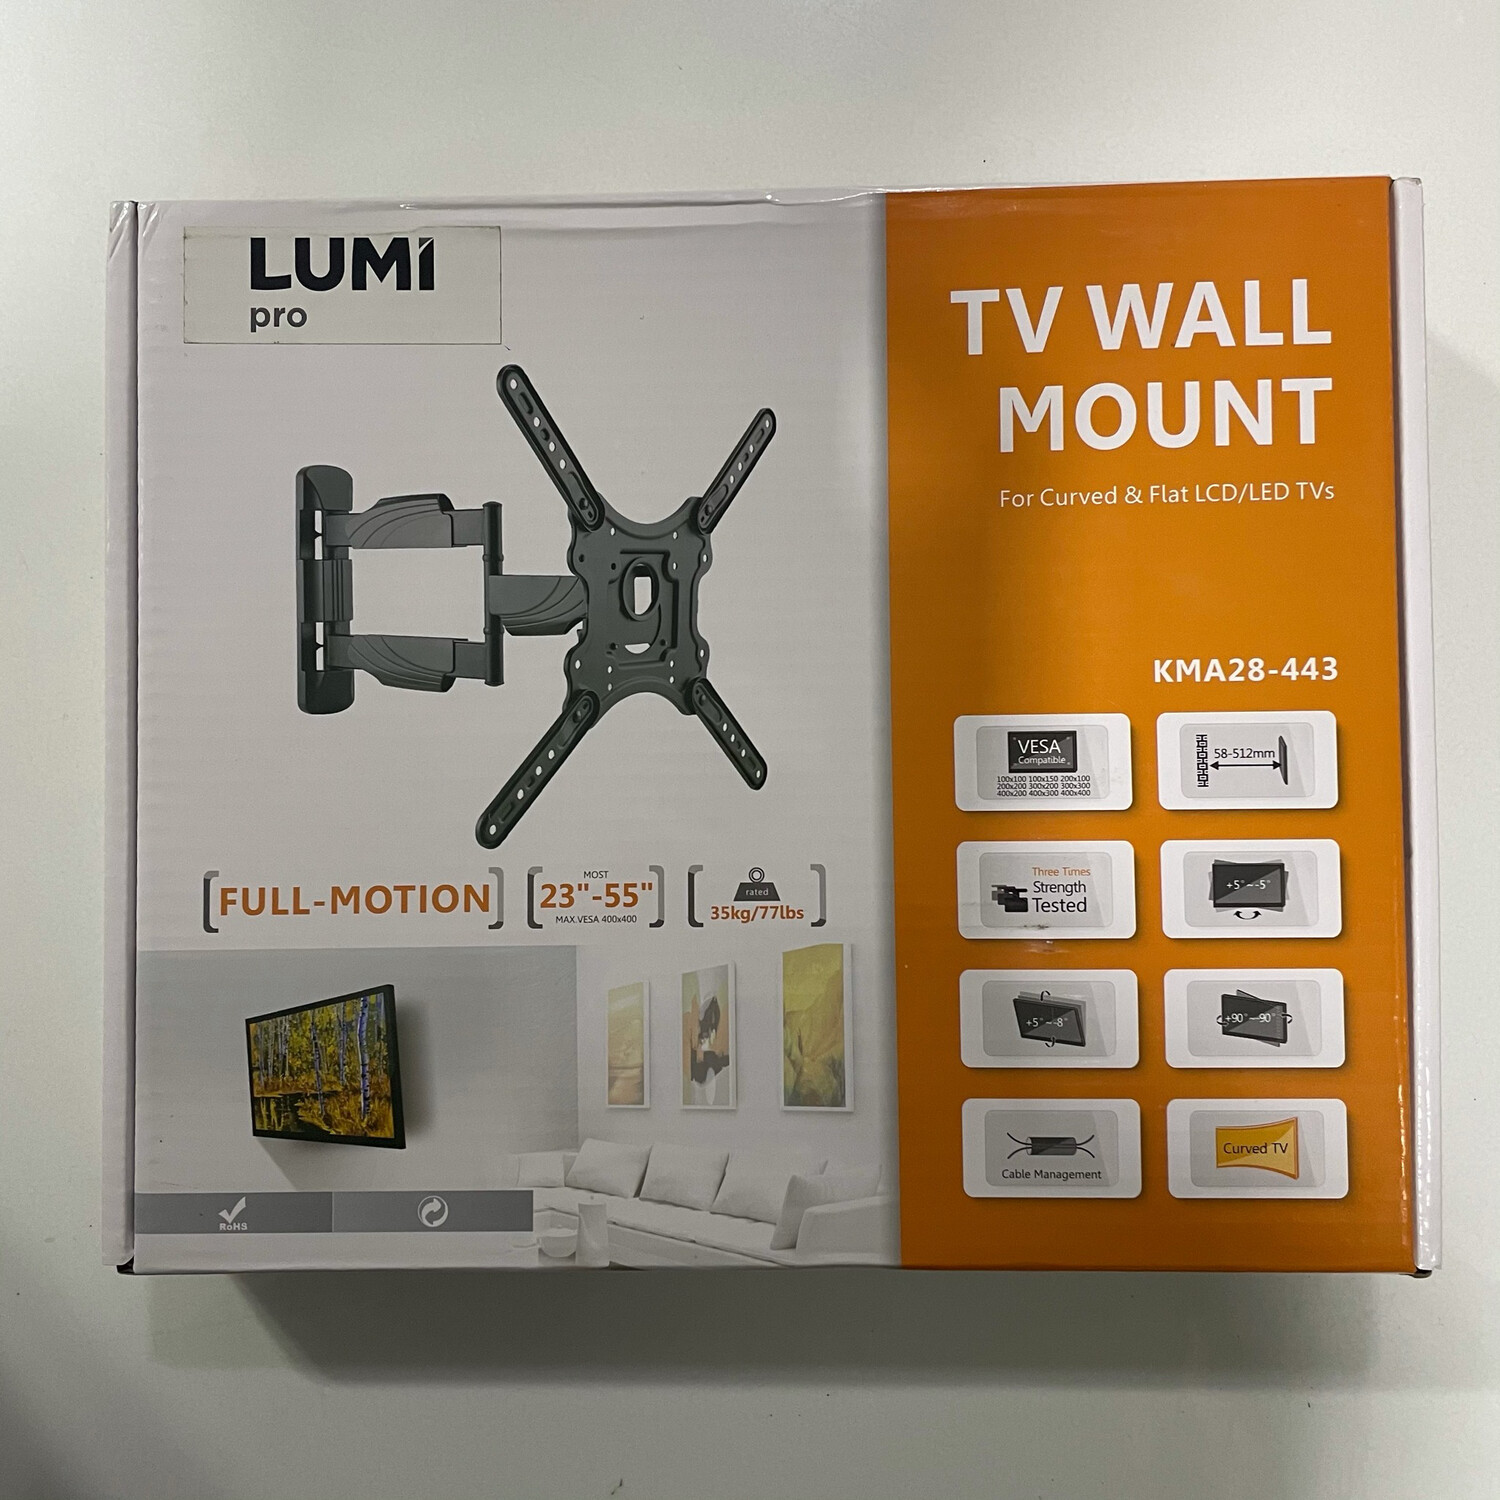 Lumi Pro Full Motion TV Wall Mount, KMA28-443, 23inch to 55inch,